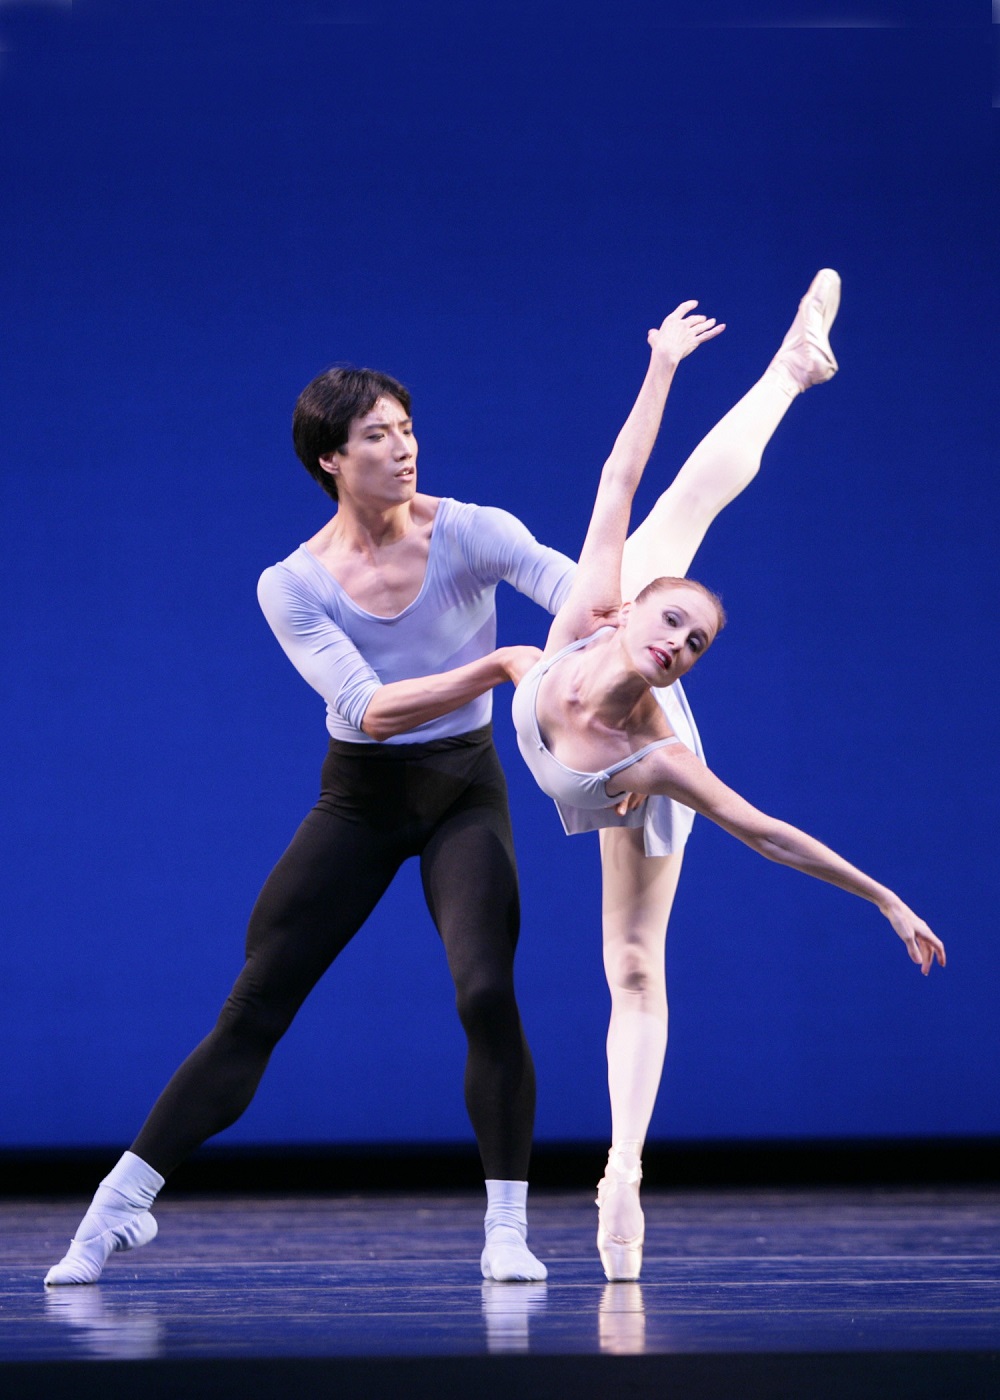 Pacific Northwest Ballet continues its 50th Anniversary Season with The Seasons’ Canon